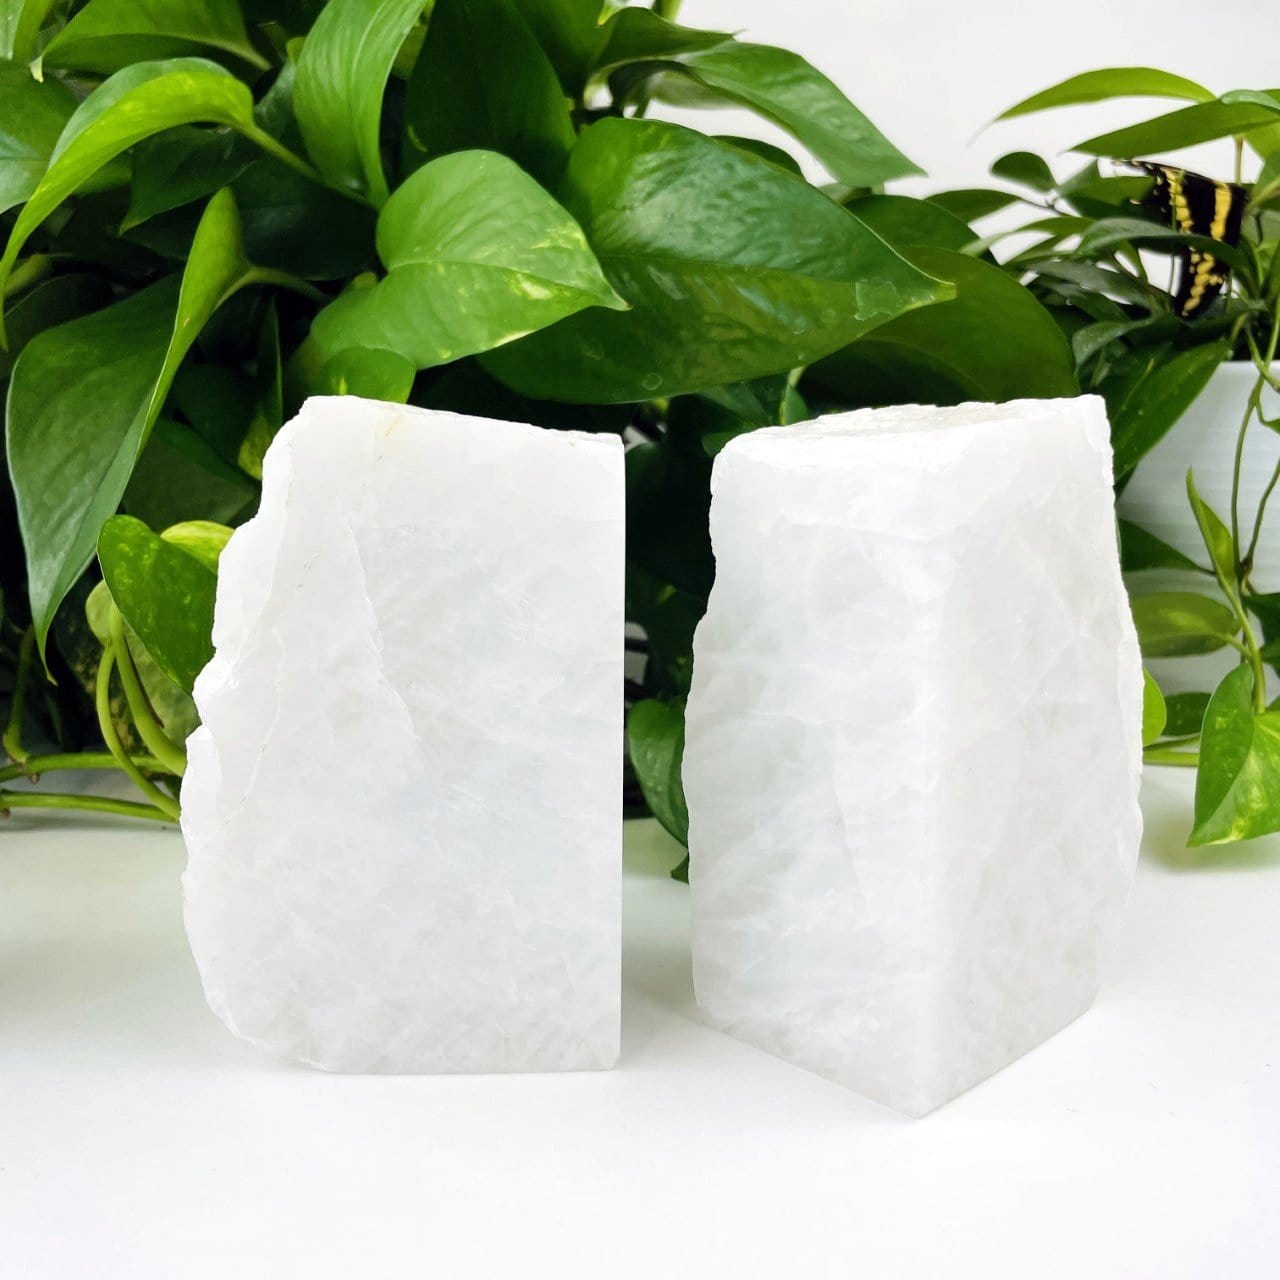 Crystal quartz bookend with a plant behind them.